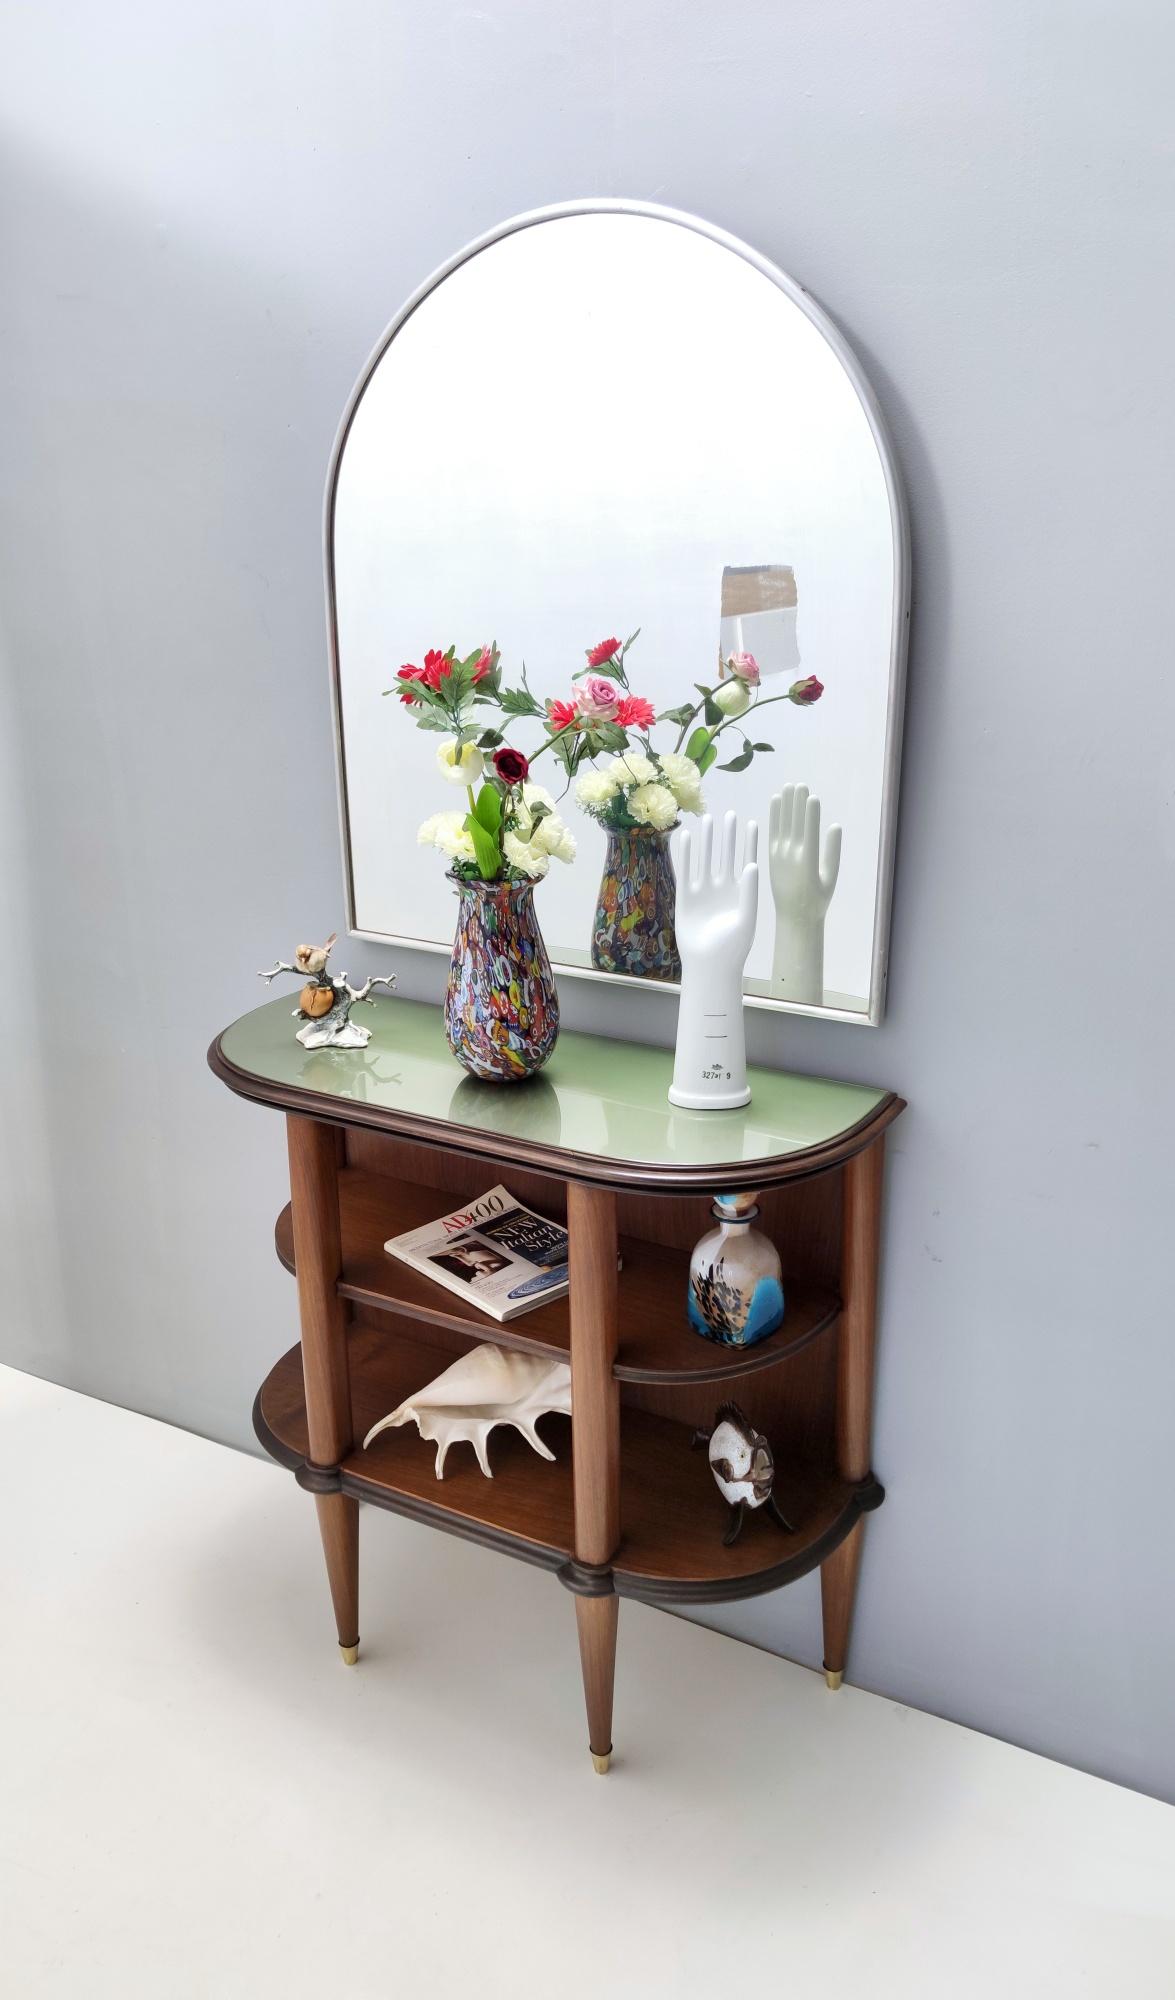 Made in Italy, 1940s - 1950s. 
This console table is made in walnut and moulded ebonized beech edges and features a demilune back-painted glass top and brass feet caps. 
It is a vintage item, therefore it might show slight traces of use, but it can